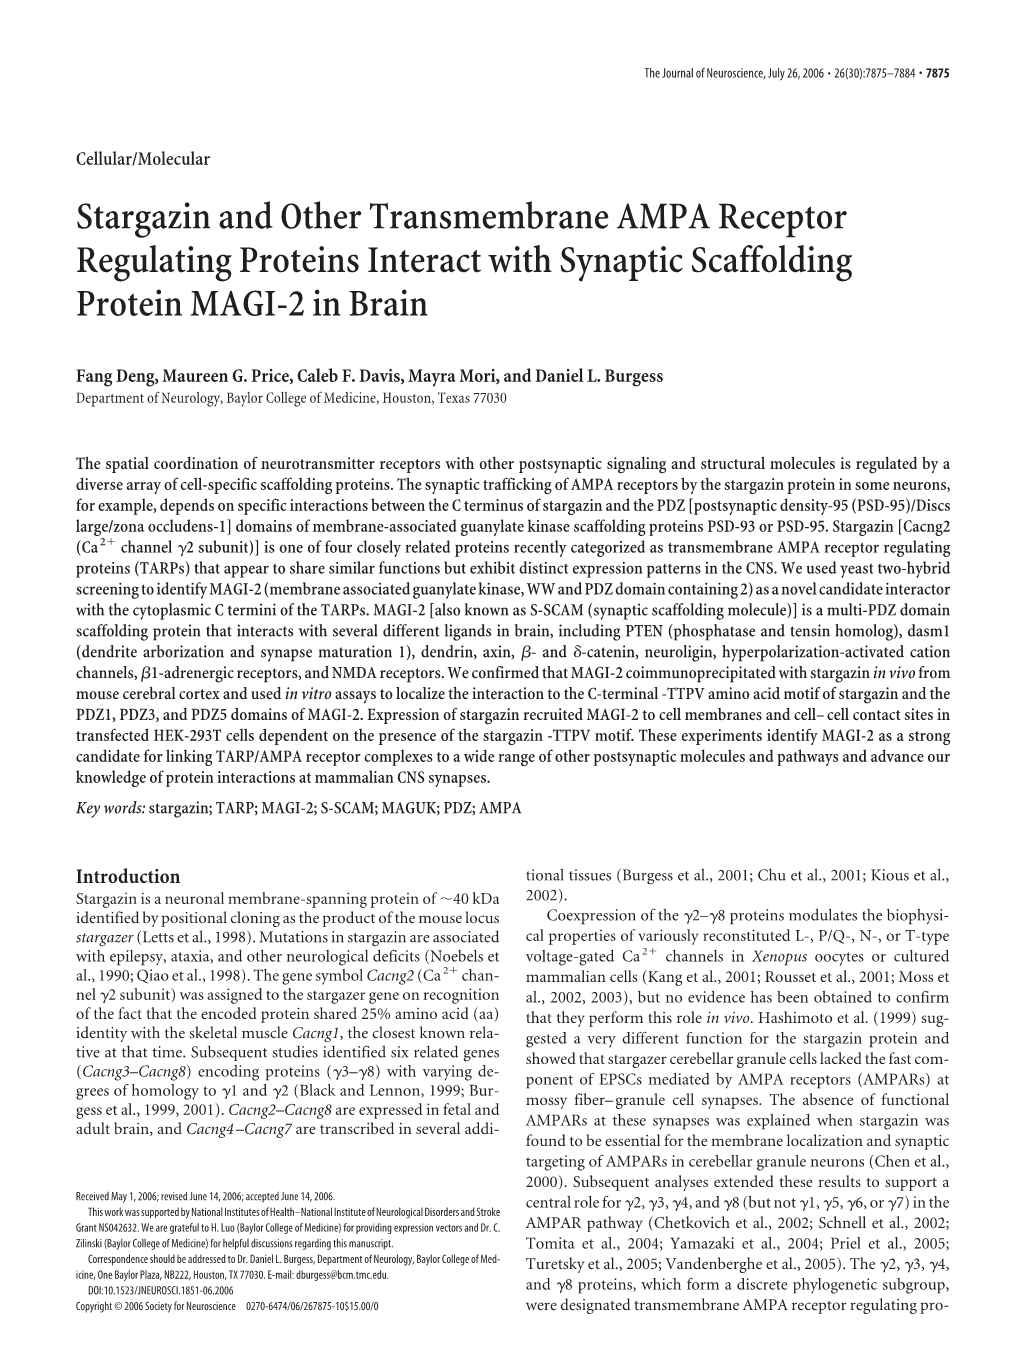 Stargazin and Other Transmembrane AMPA Receptor Regulating Proteins Interact with Synaptic Scaffolding Protein MAGI-2 in Brain